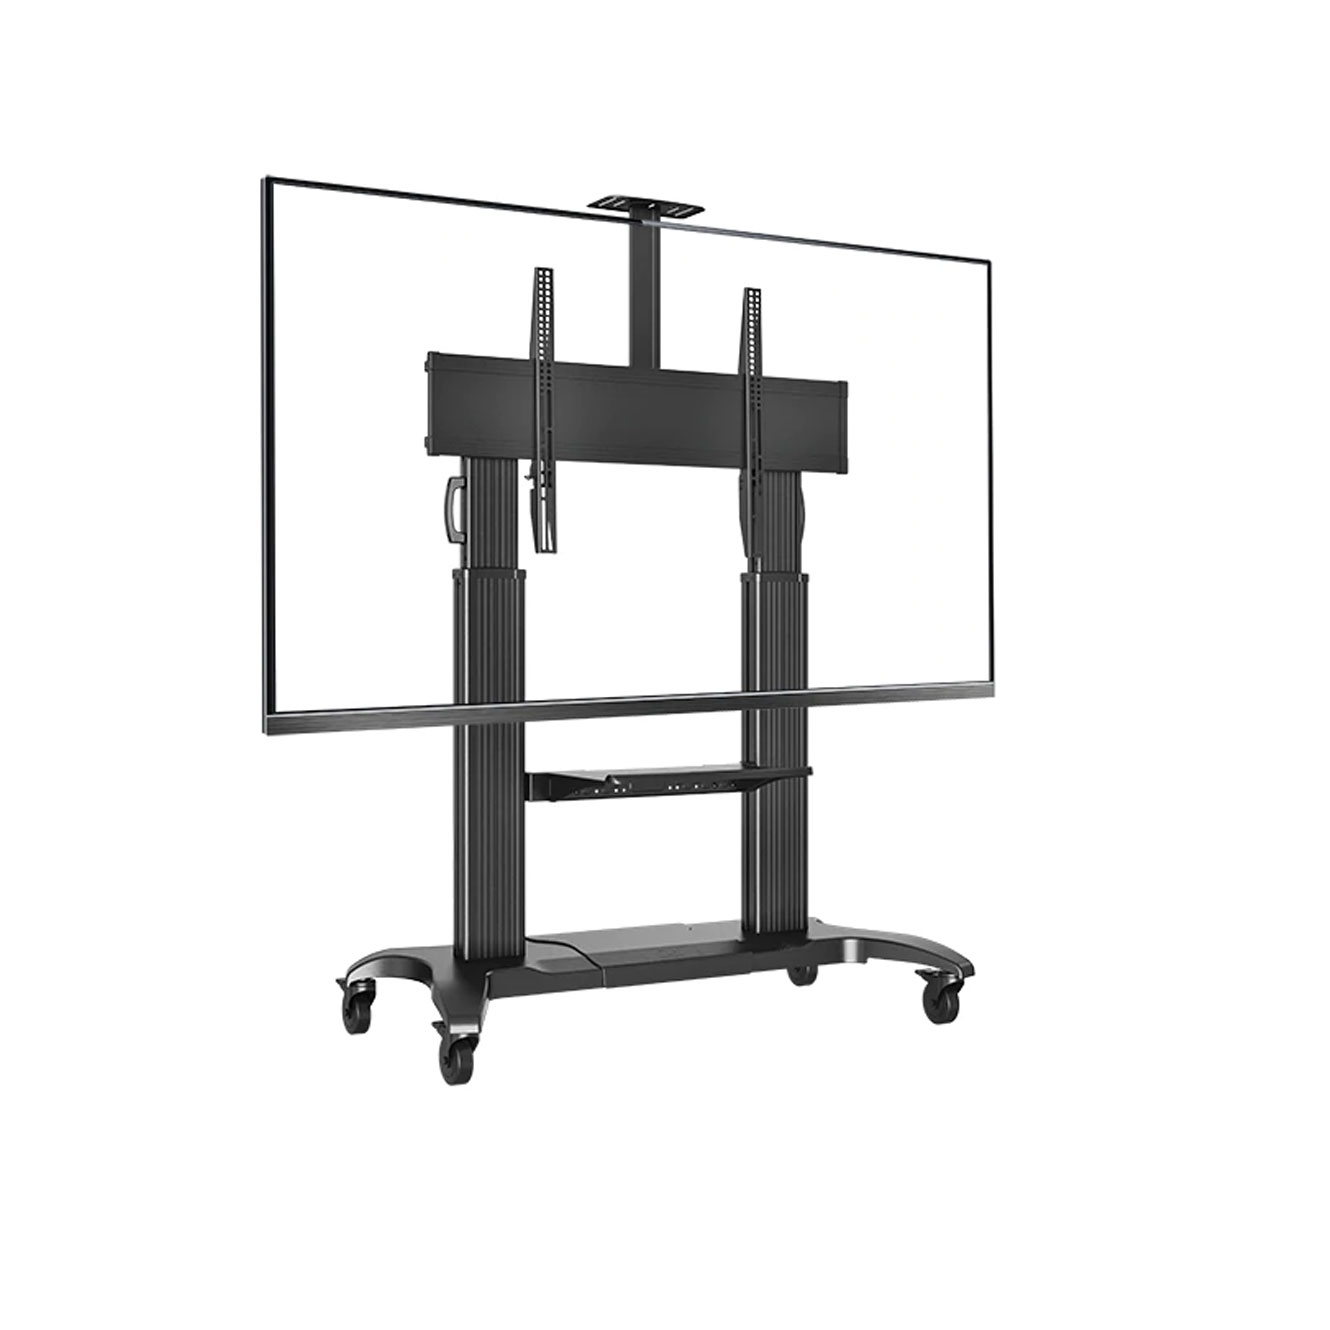 PORTABLE TV STAND/Mobile LCD Stand 60-100' Black - Big ...